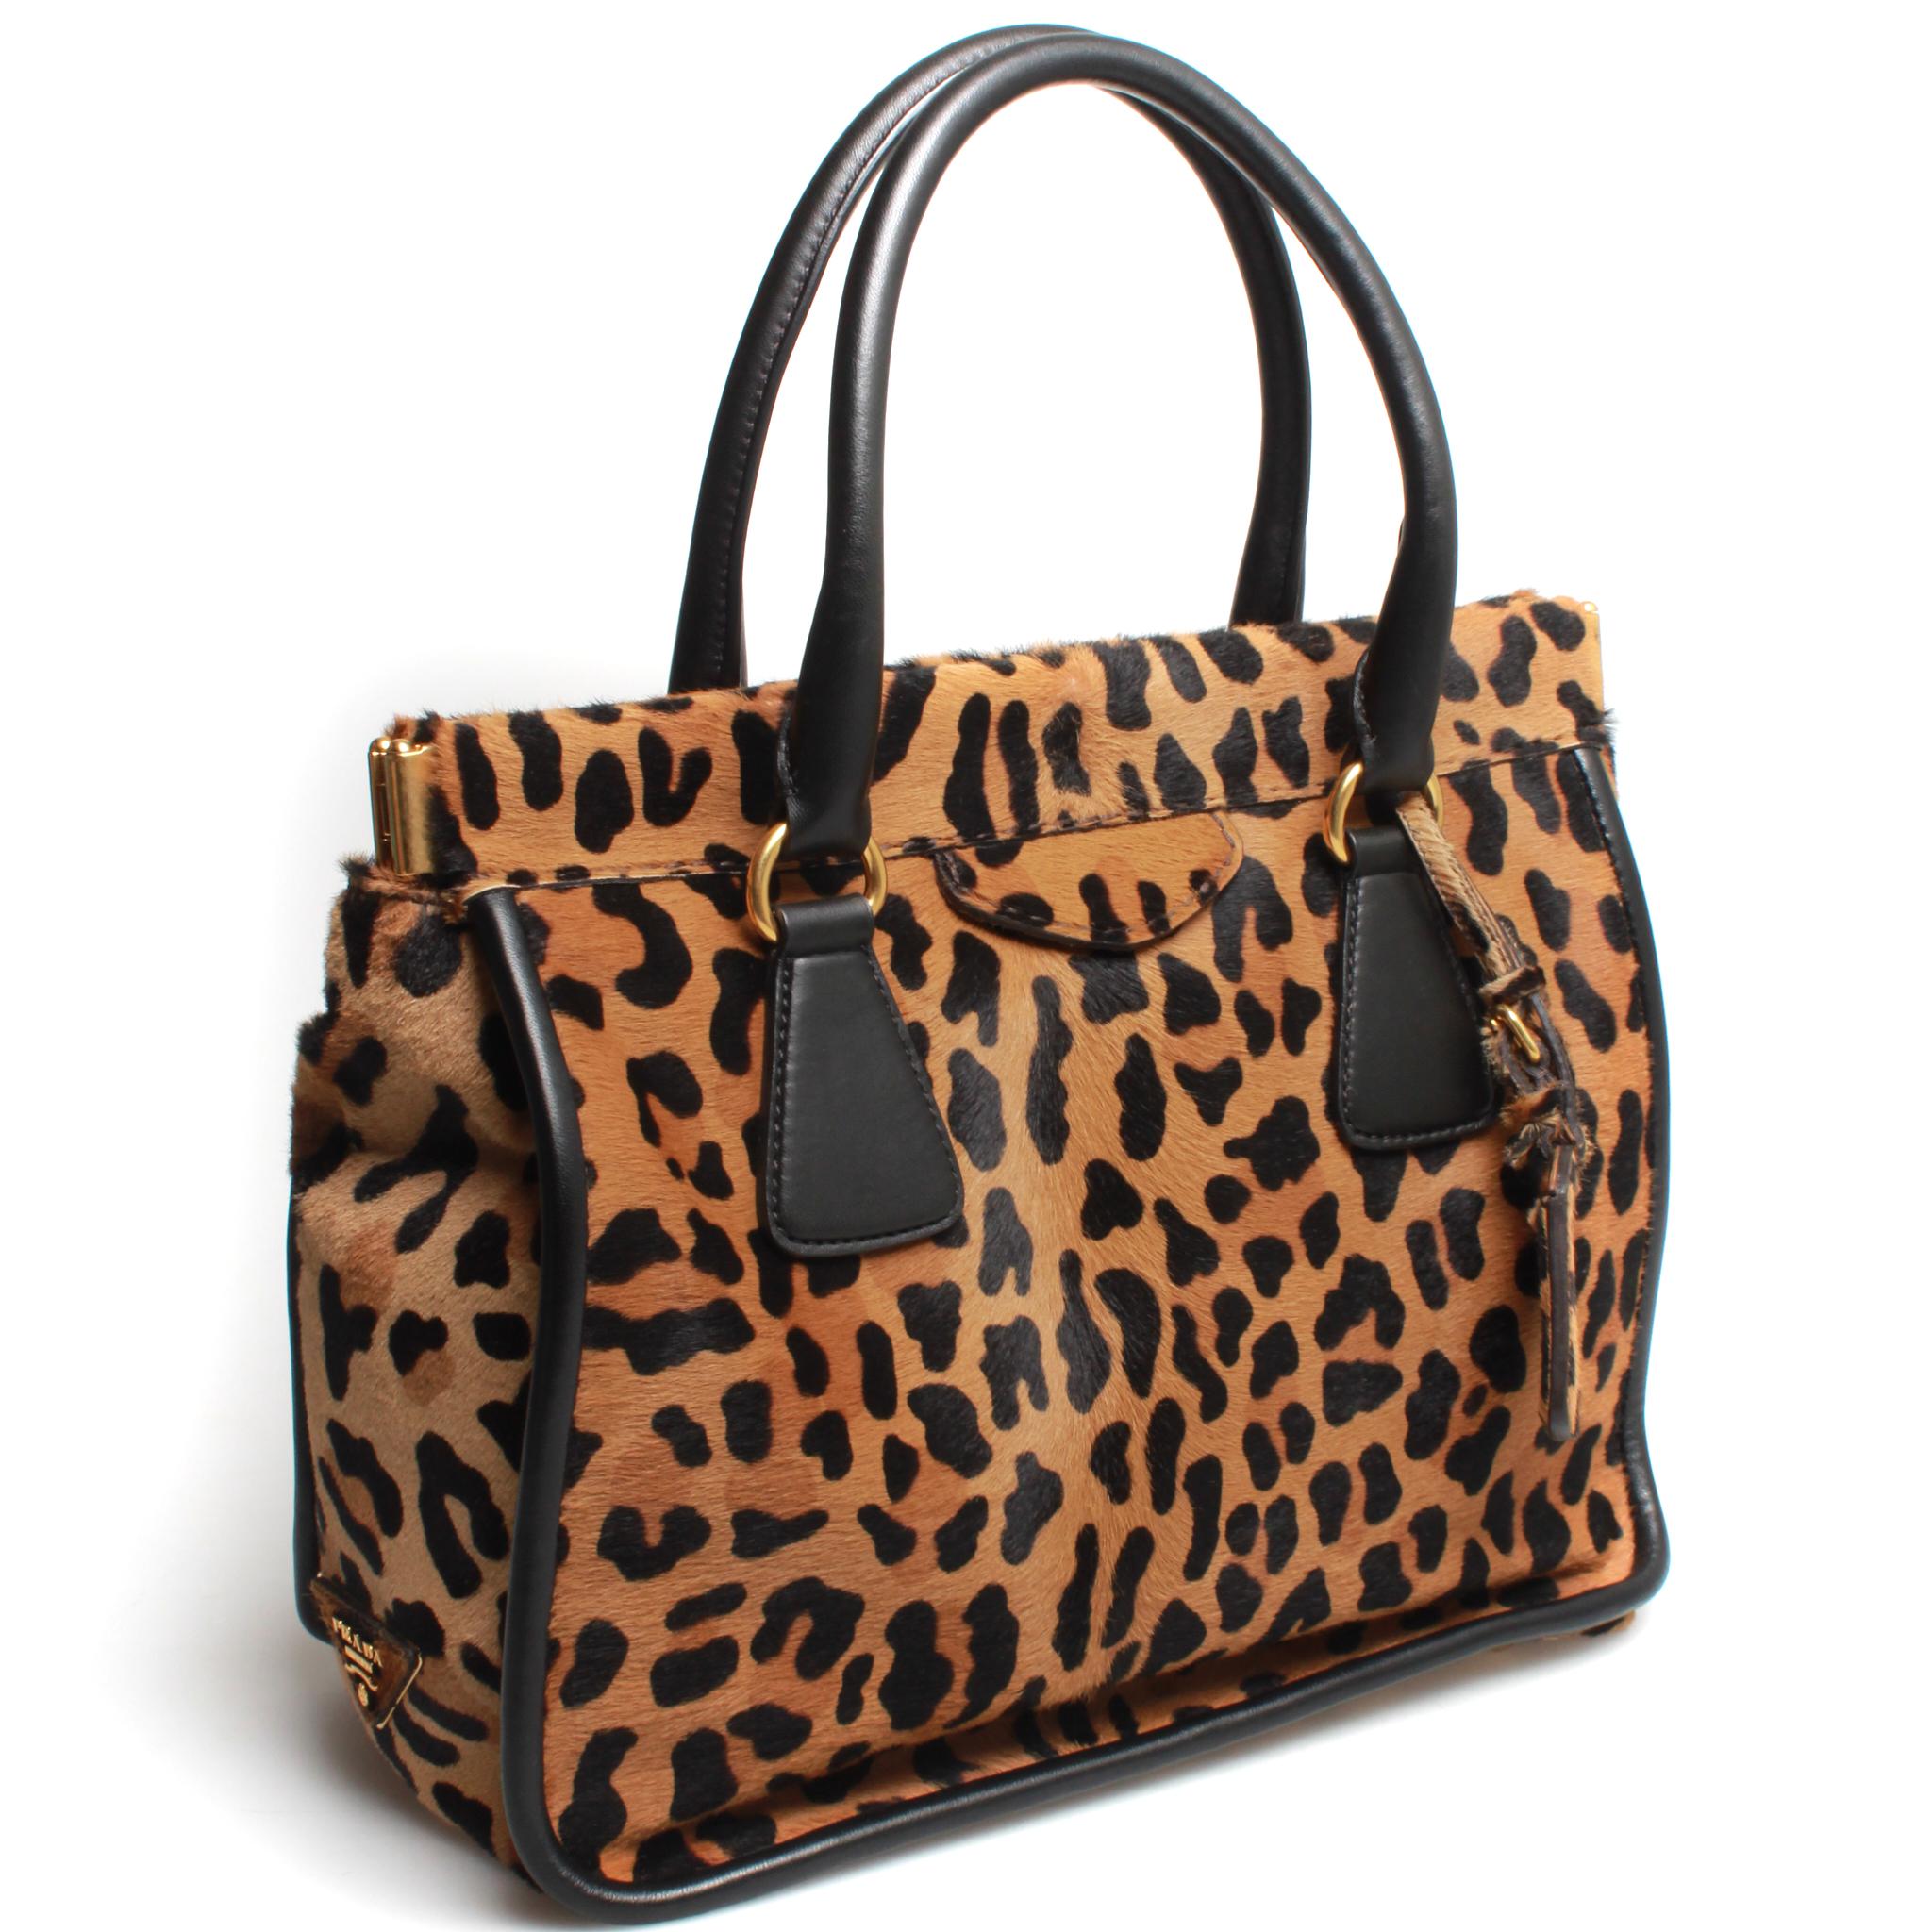 Beautifully structured leopard print PRADA pony hair handbag with gorgeous beige suede interior and dual top handles in black leather. 
Comes with original box. 
FINAL SALE
